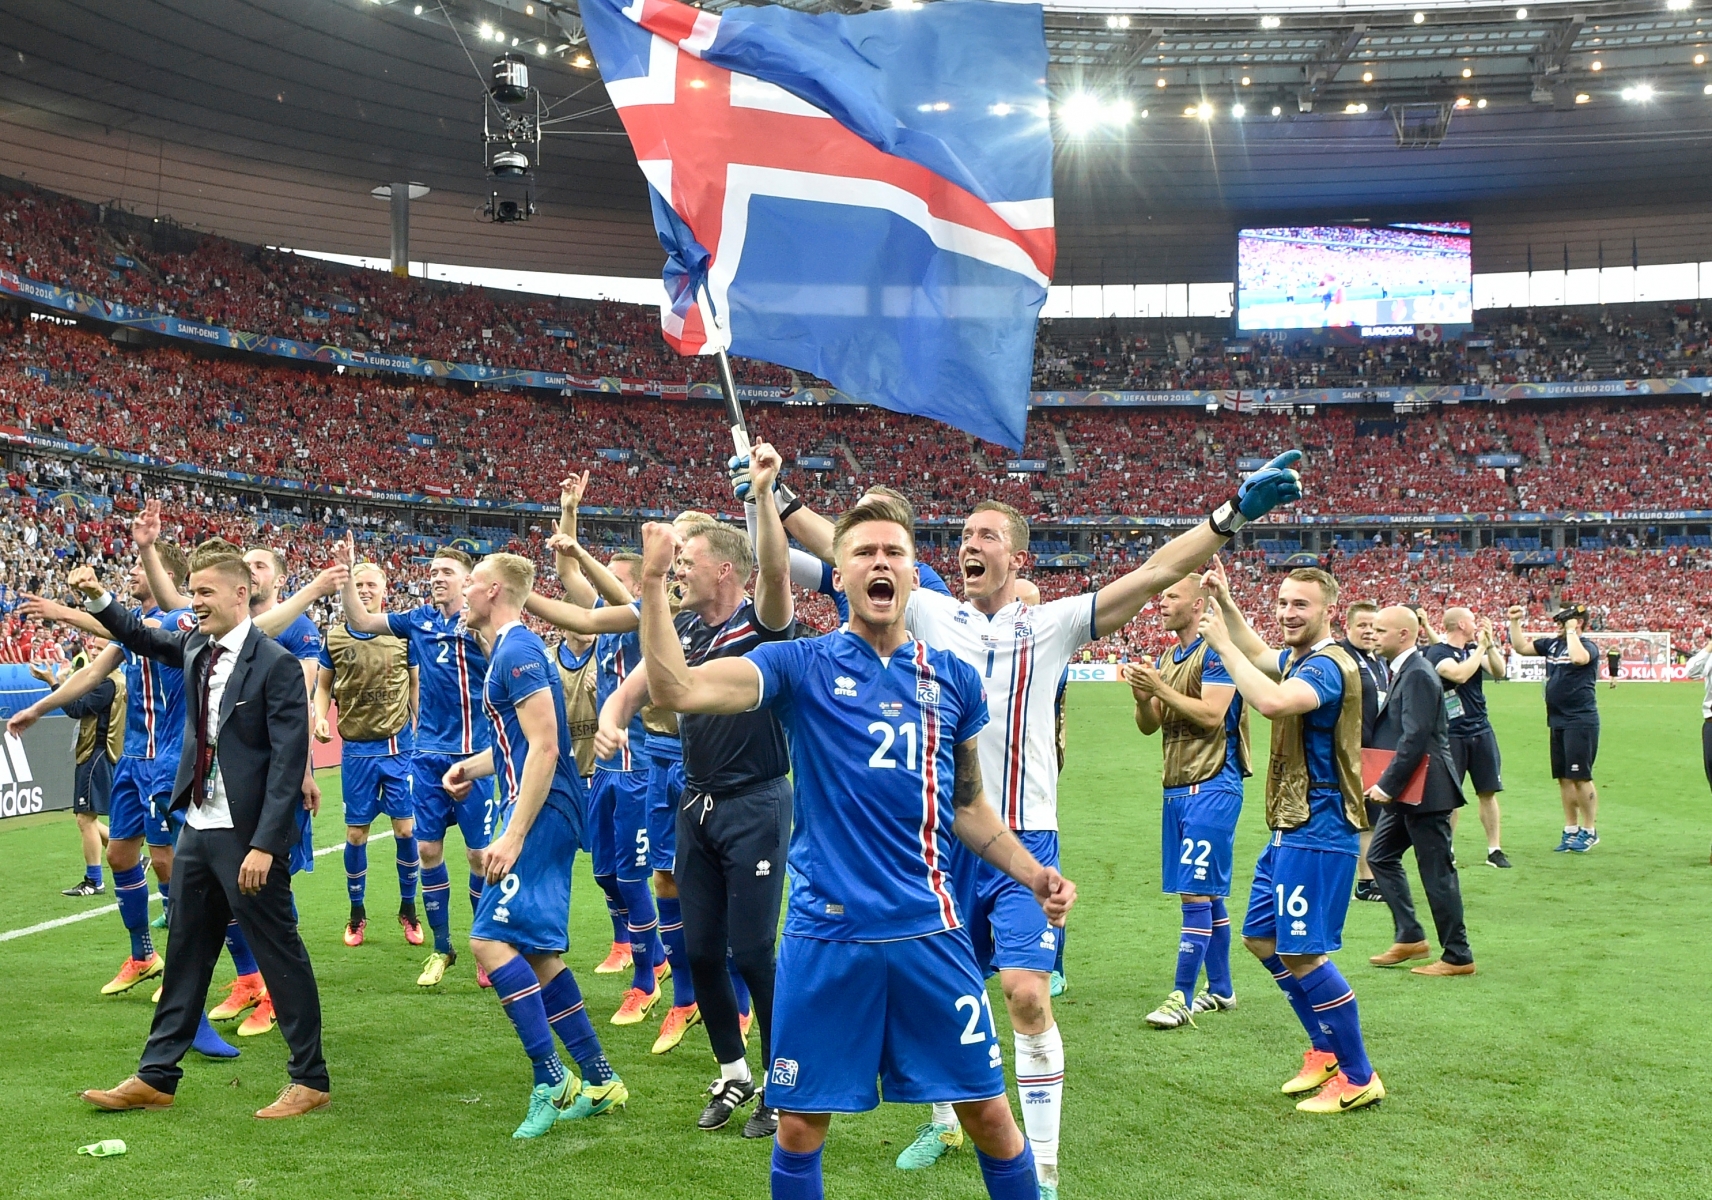 Iceland goalkeeper Hannes Halldorsson, center right, and Arnor Ingvi Traustason, center, celebrate with team mates after the Euro 2016 Group F soccer match between Iceland and Austria at the Stade de France in Saint-Denis, north of Paris, France, Wednesday, June 22, 2016. (AP Photo/Martin Meissner) APTOPIX Soccer Euro 2016 Iceland Austria